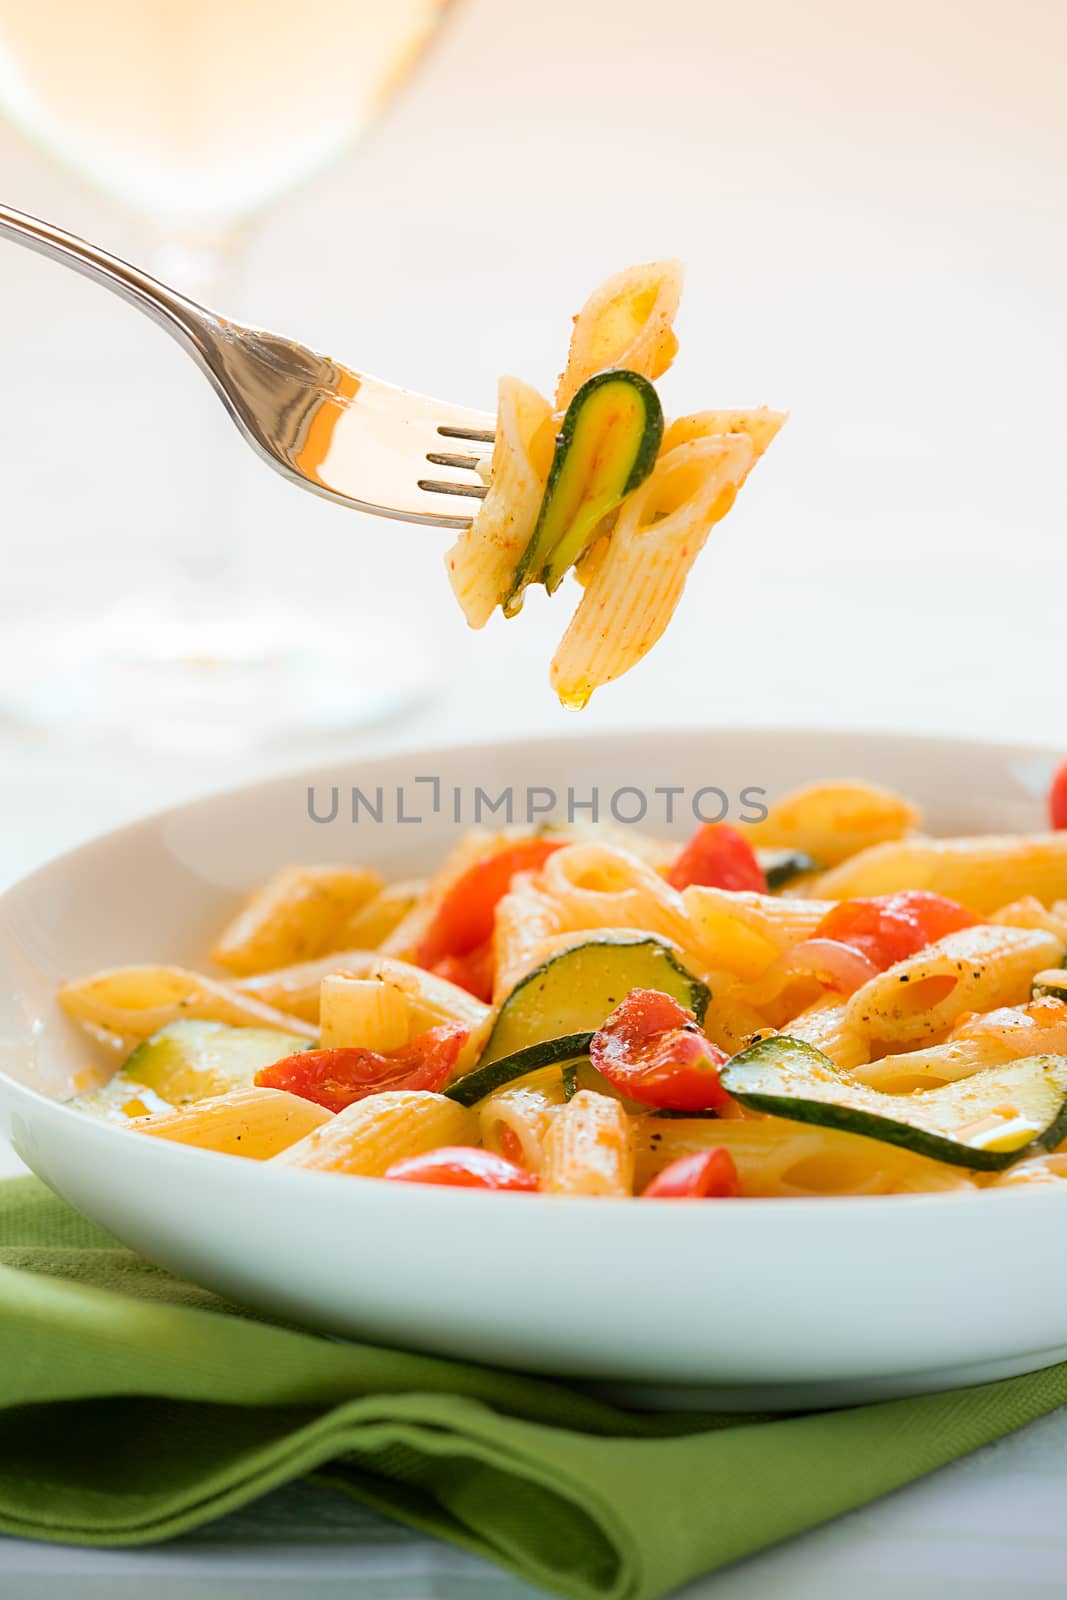 Traditional italian penne pasta with zucchini and cherry tomatoes seasoned with oil and pepper ready to eat